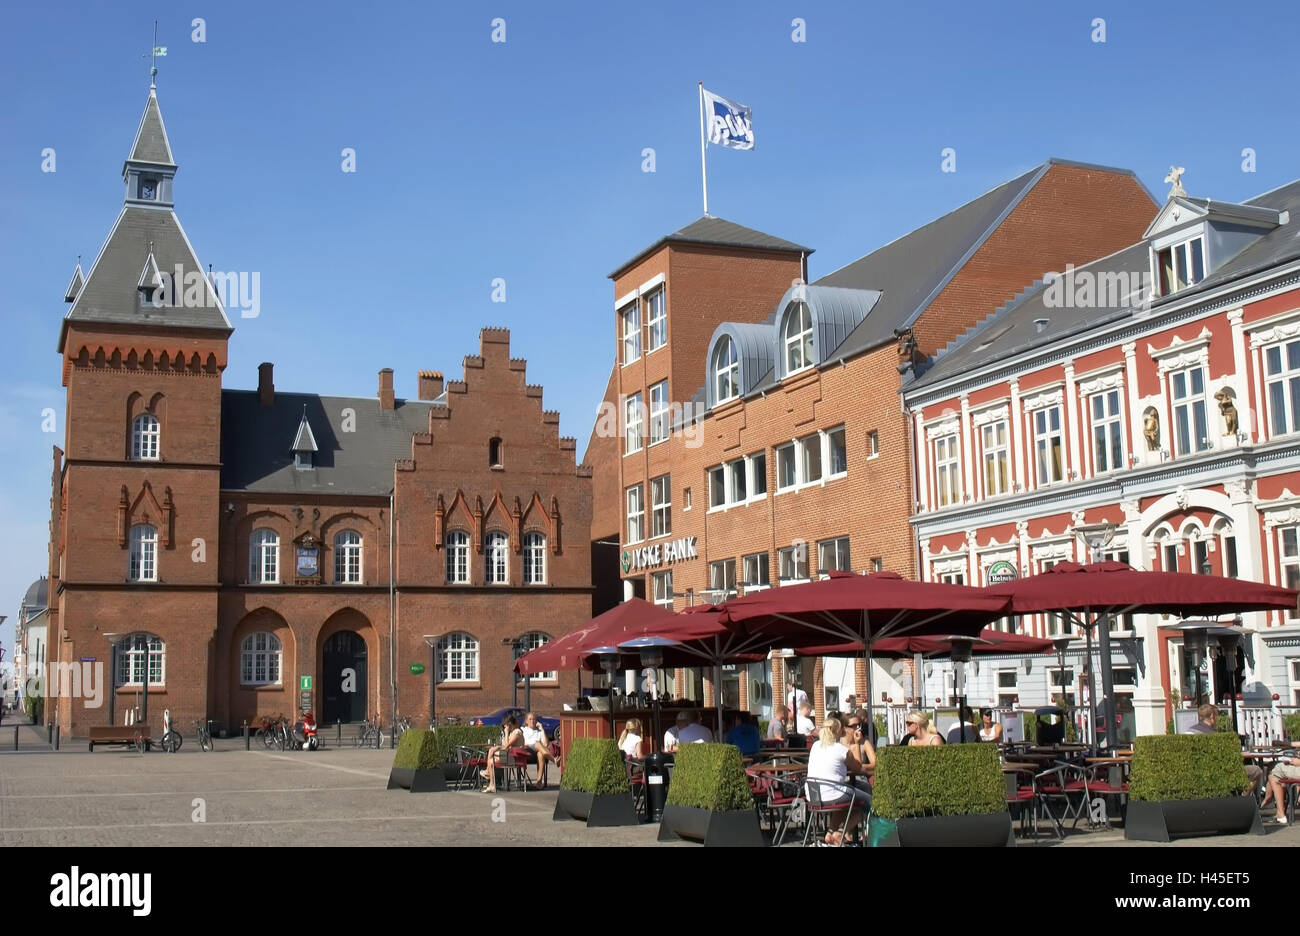 Denmark, Jutland, Esbjerg, city hall square, cafe, guests, no model release, destination, town, centre, city hall, city hall tower, building, houses, architecture, brick architecture, gastronomy, street cafe, summer, sunshades, people, tourists, tourism, Stock Photo